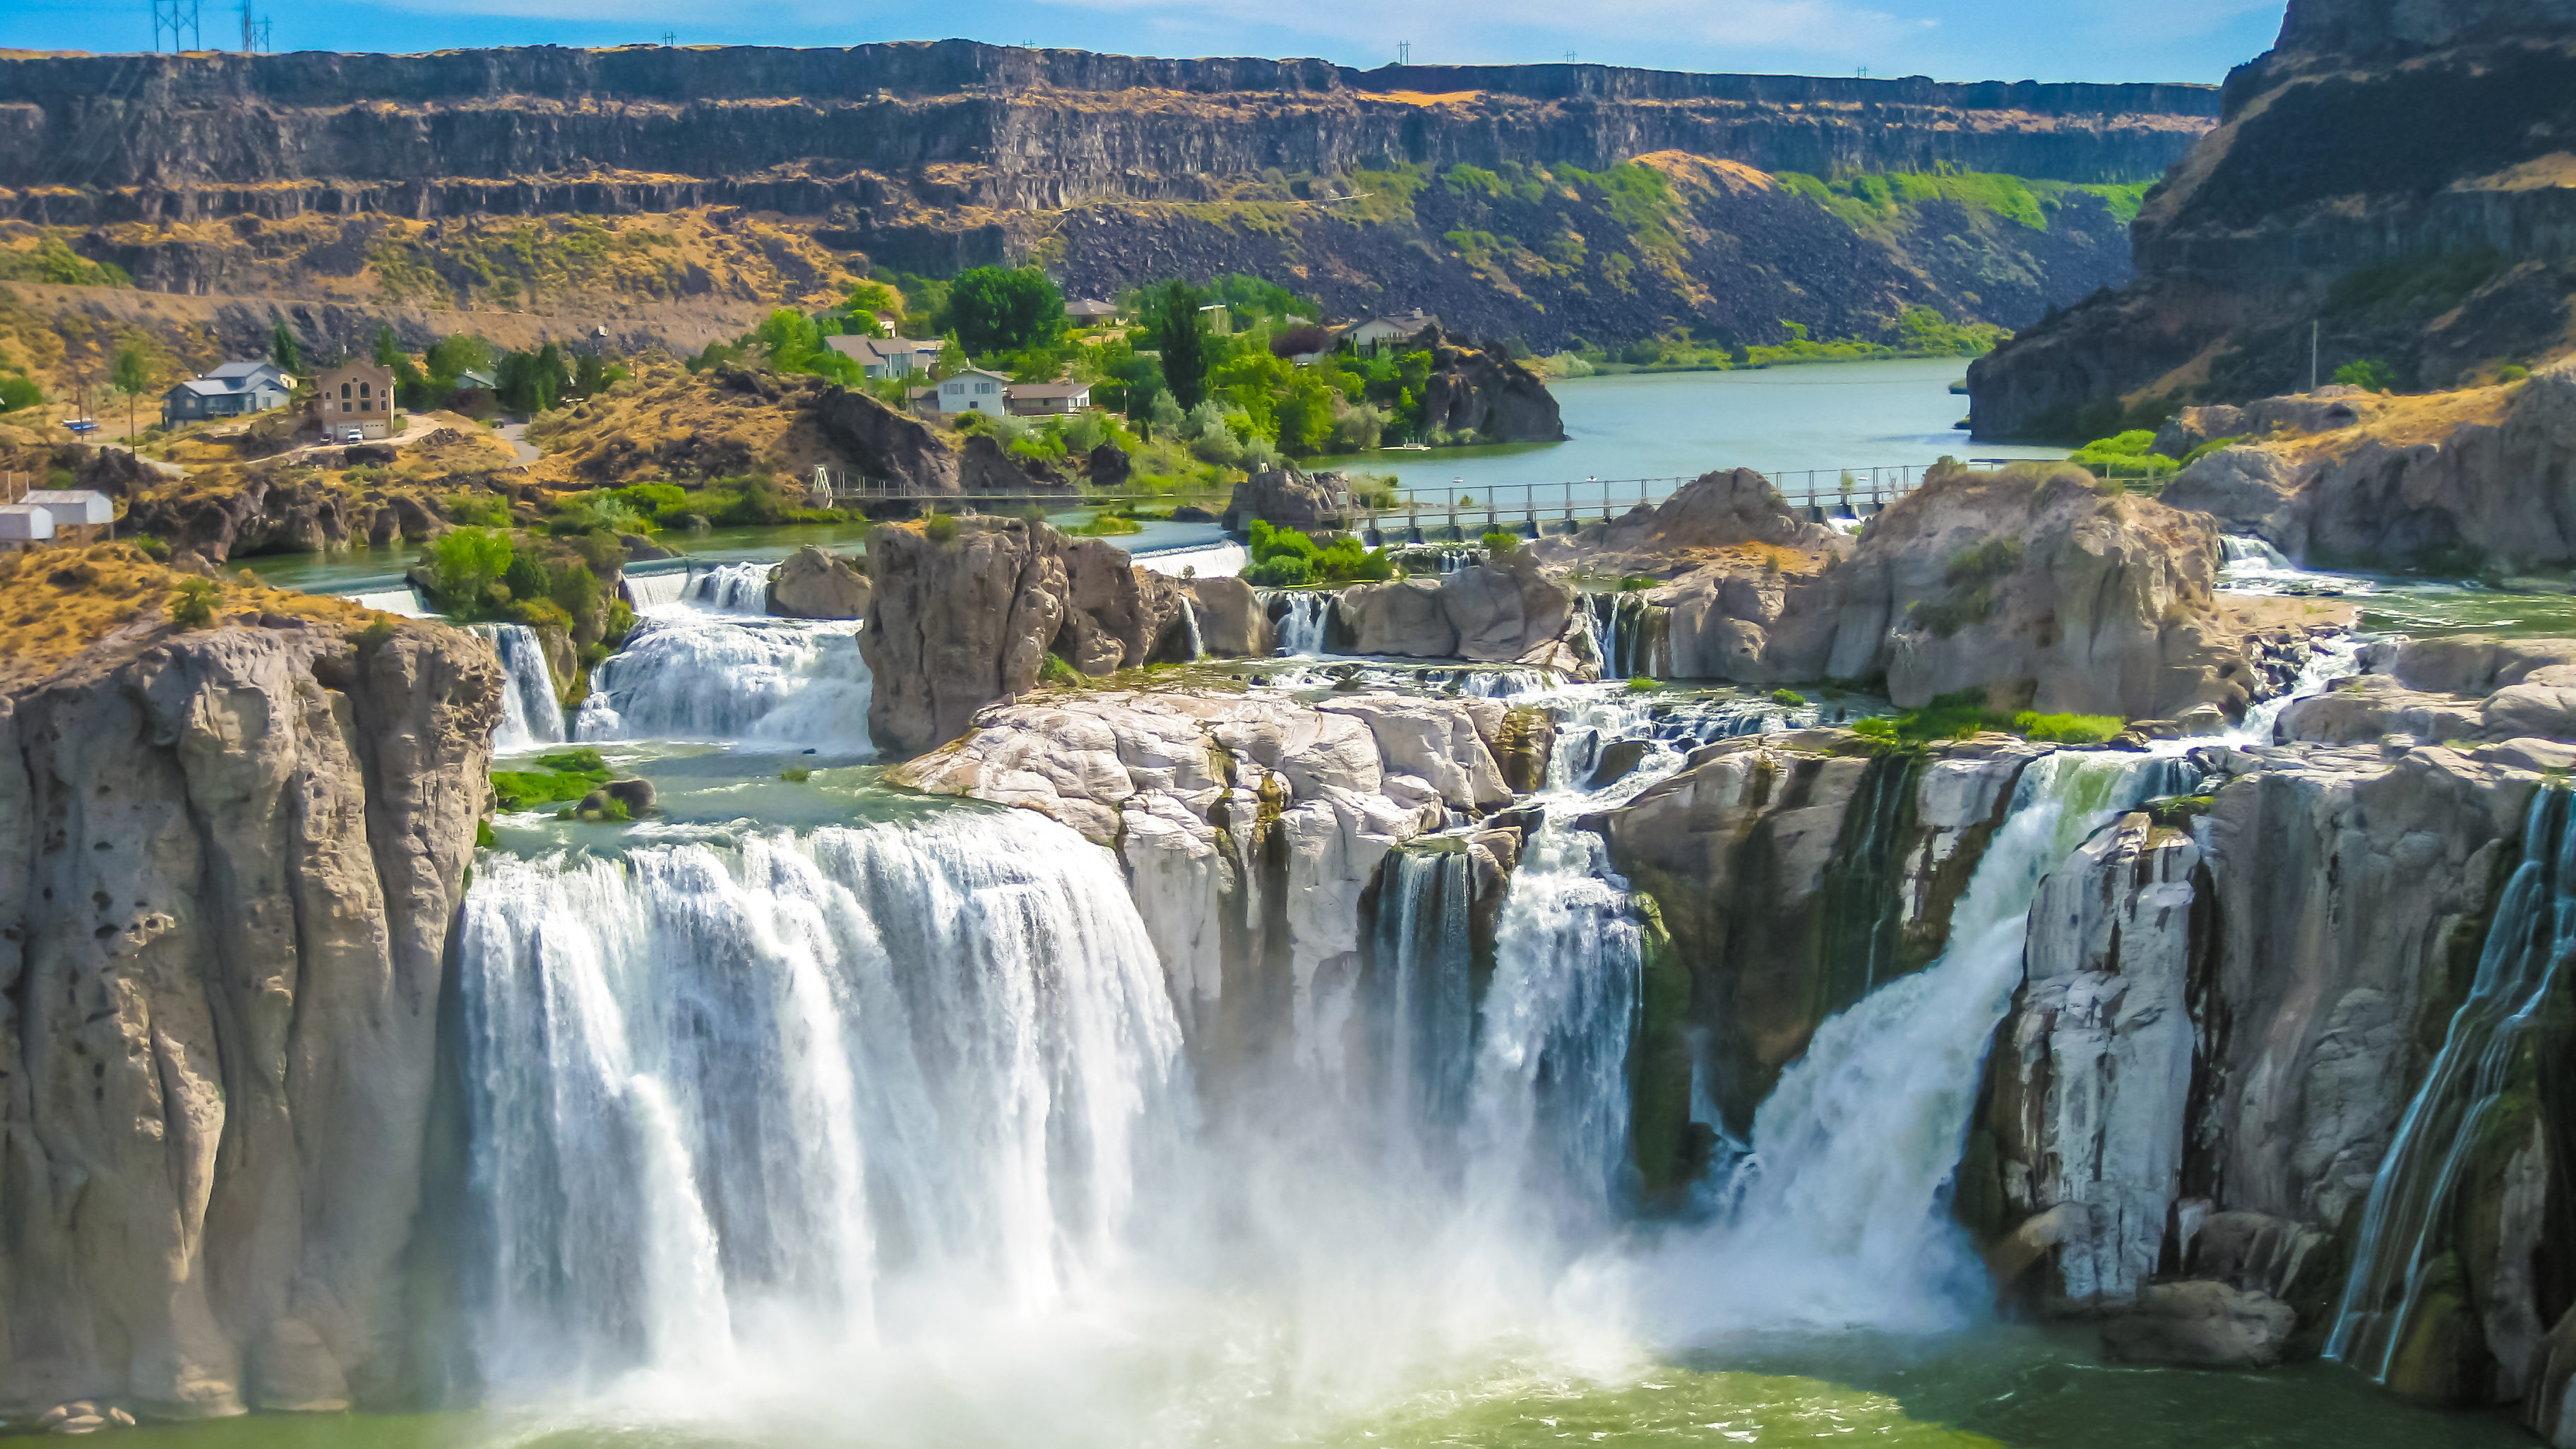 Shoshone Falls - Fly & Drive Wild Wild West | US Travel